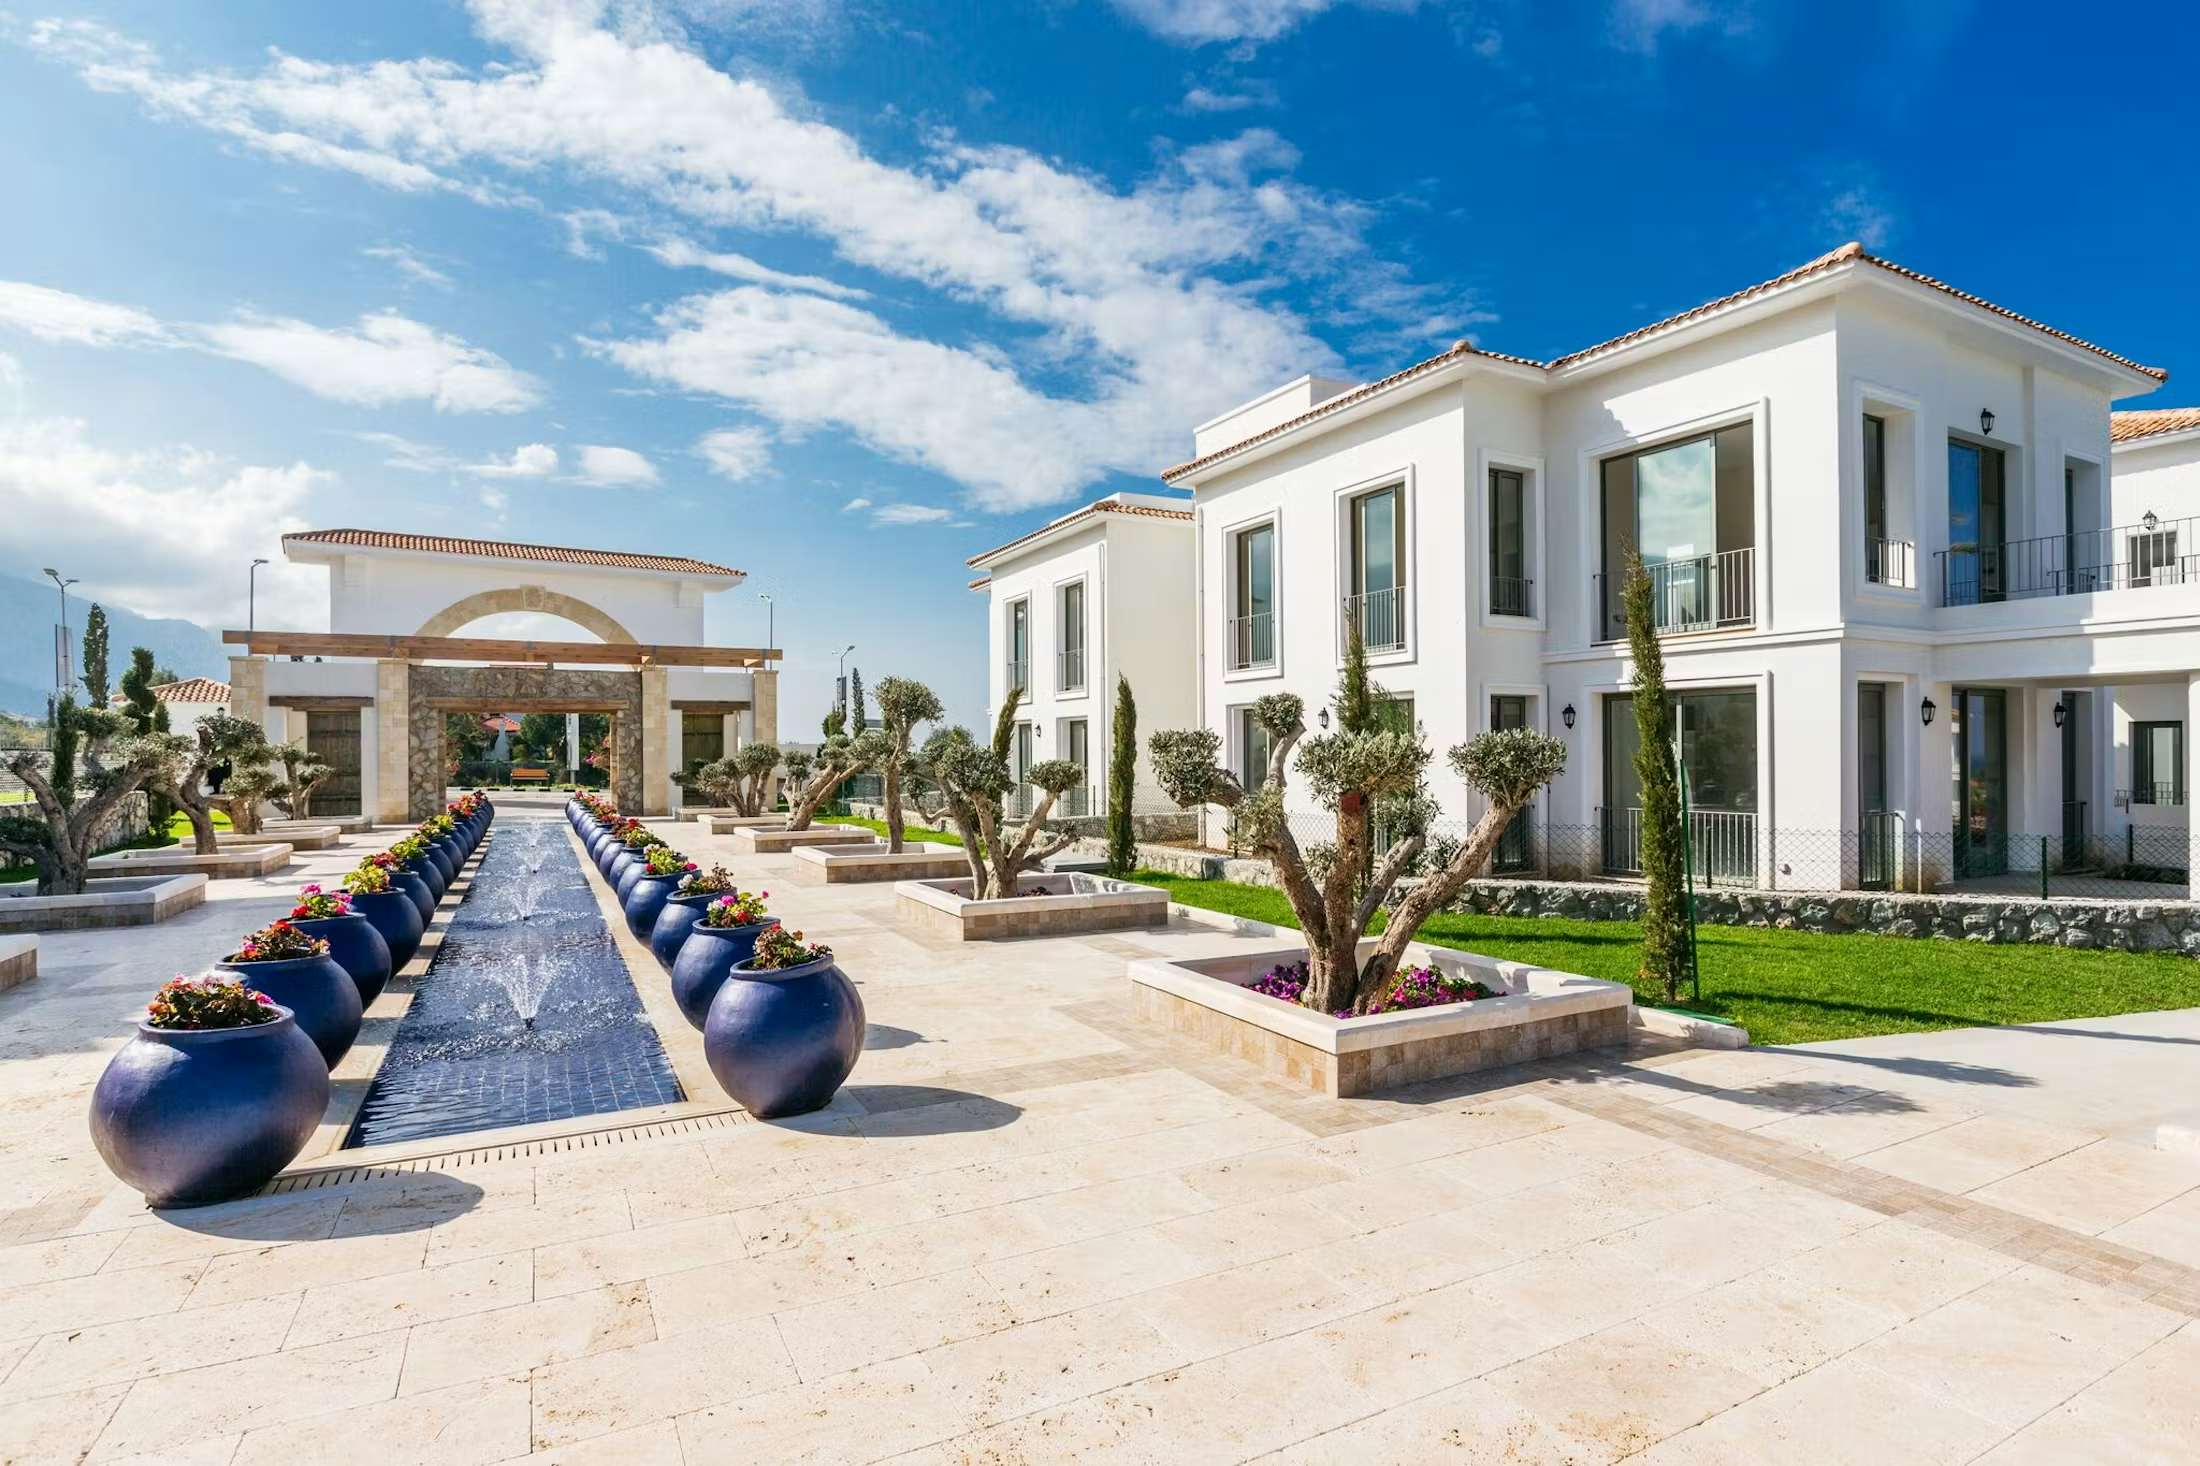 Investment Spotlight: High ROI Property Options in Northern Cyprus